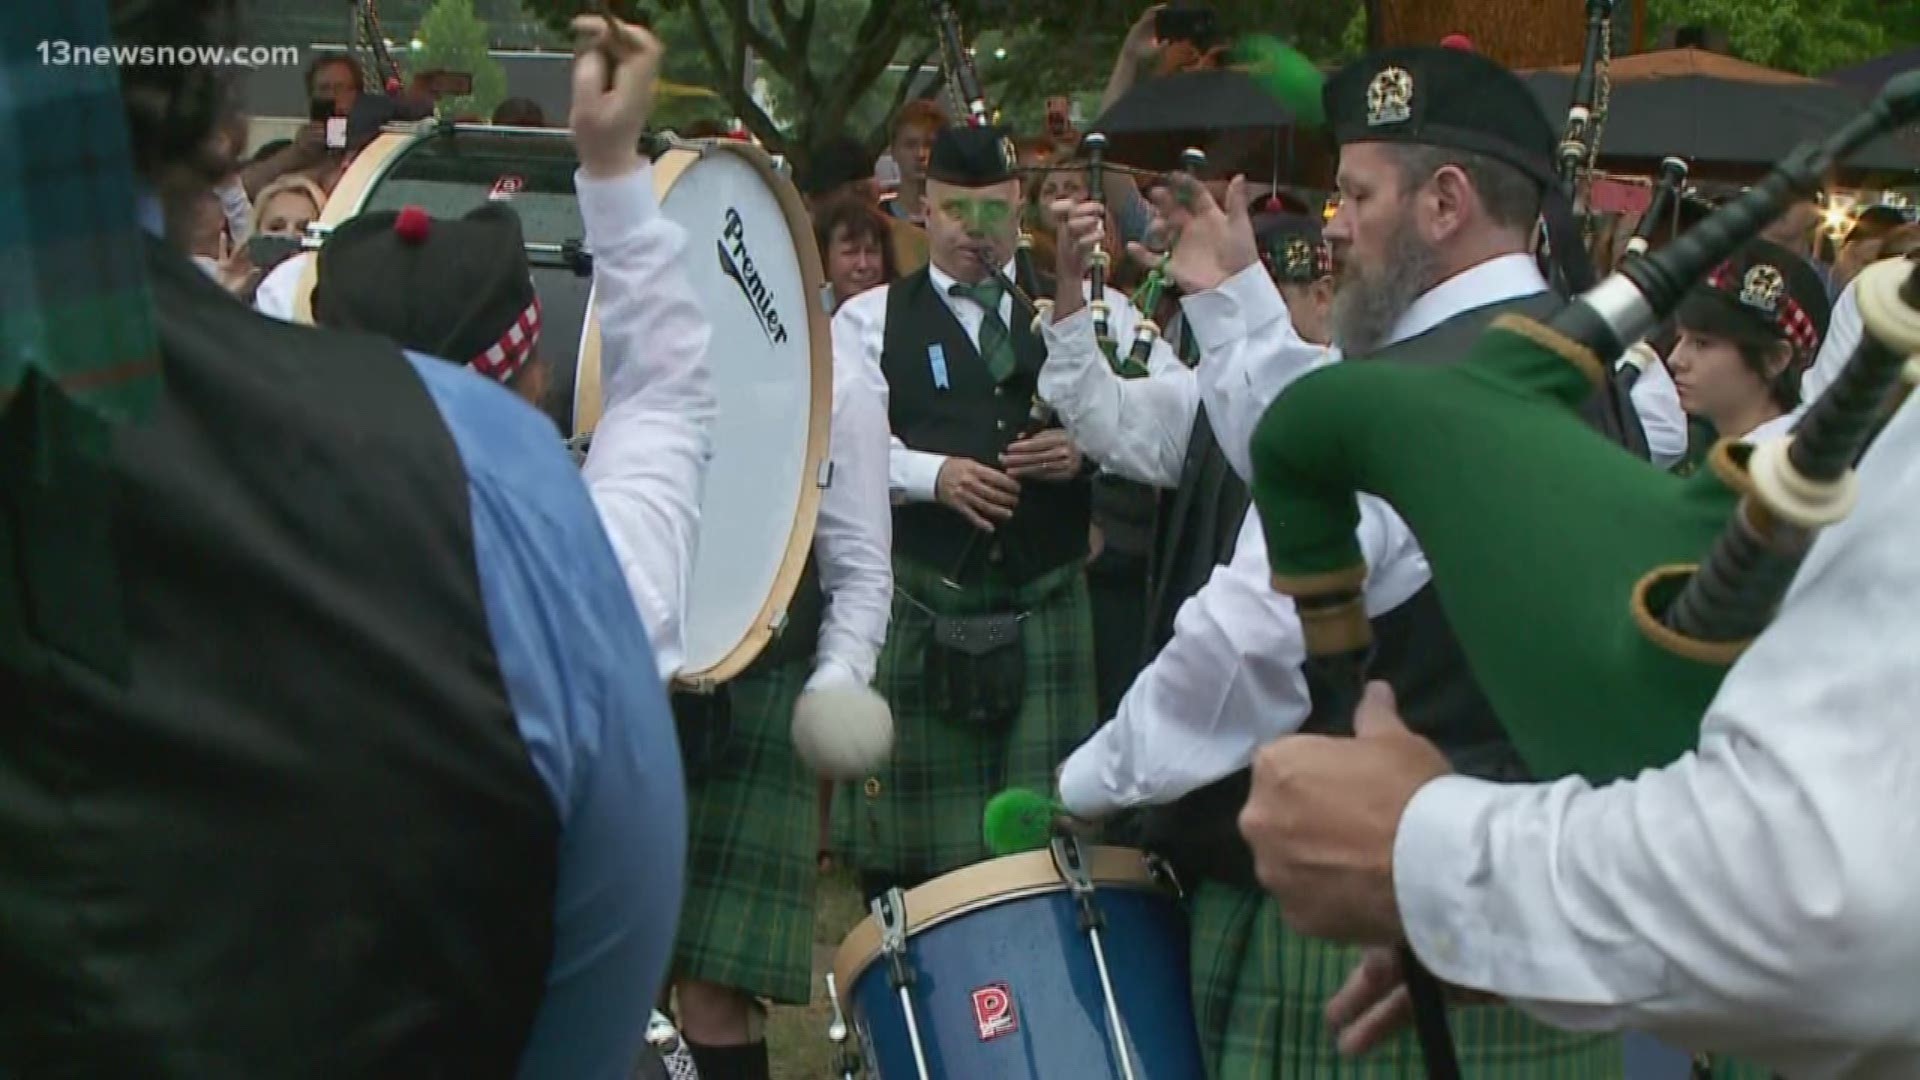 Tidewater Pipes and Drums played "Amazing Grace" 12 times in honor of each victim. They even left a space in their lineup for Chris Rapp, a member who was a victim.